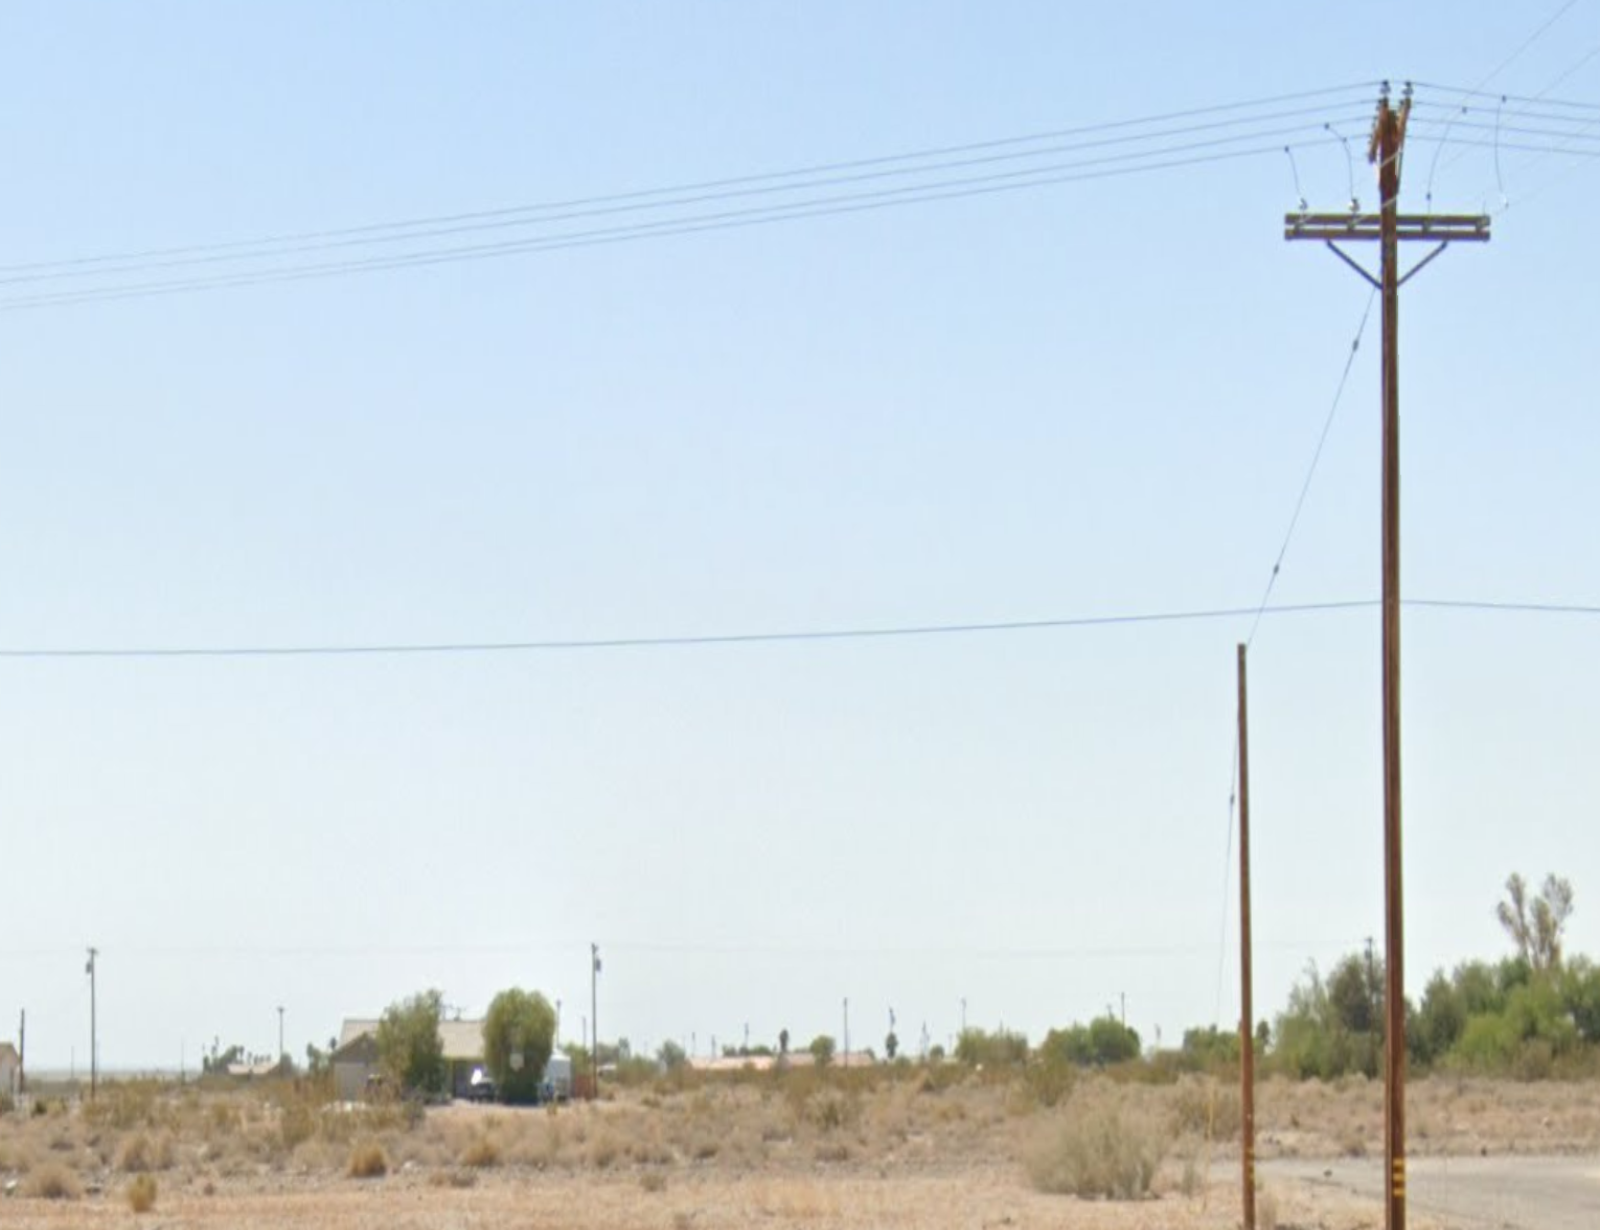 NEW!! RESIDENTIAL LOT NEAR MAIN STREET AND HIGH SCHOOL!! LOW MONTHLY PAYMENT OF $225.00  2428 Shore Life Ave., Salton City, CA 92275 APN: 012-076-013-000 - Get Land Today